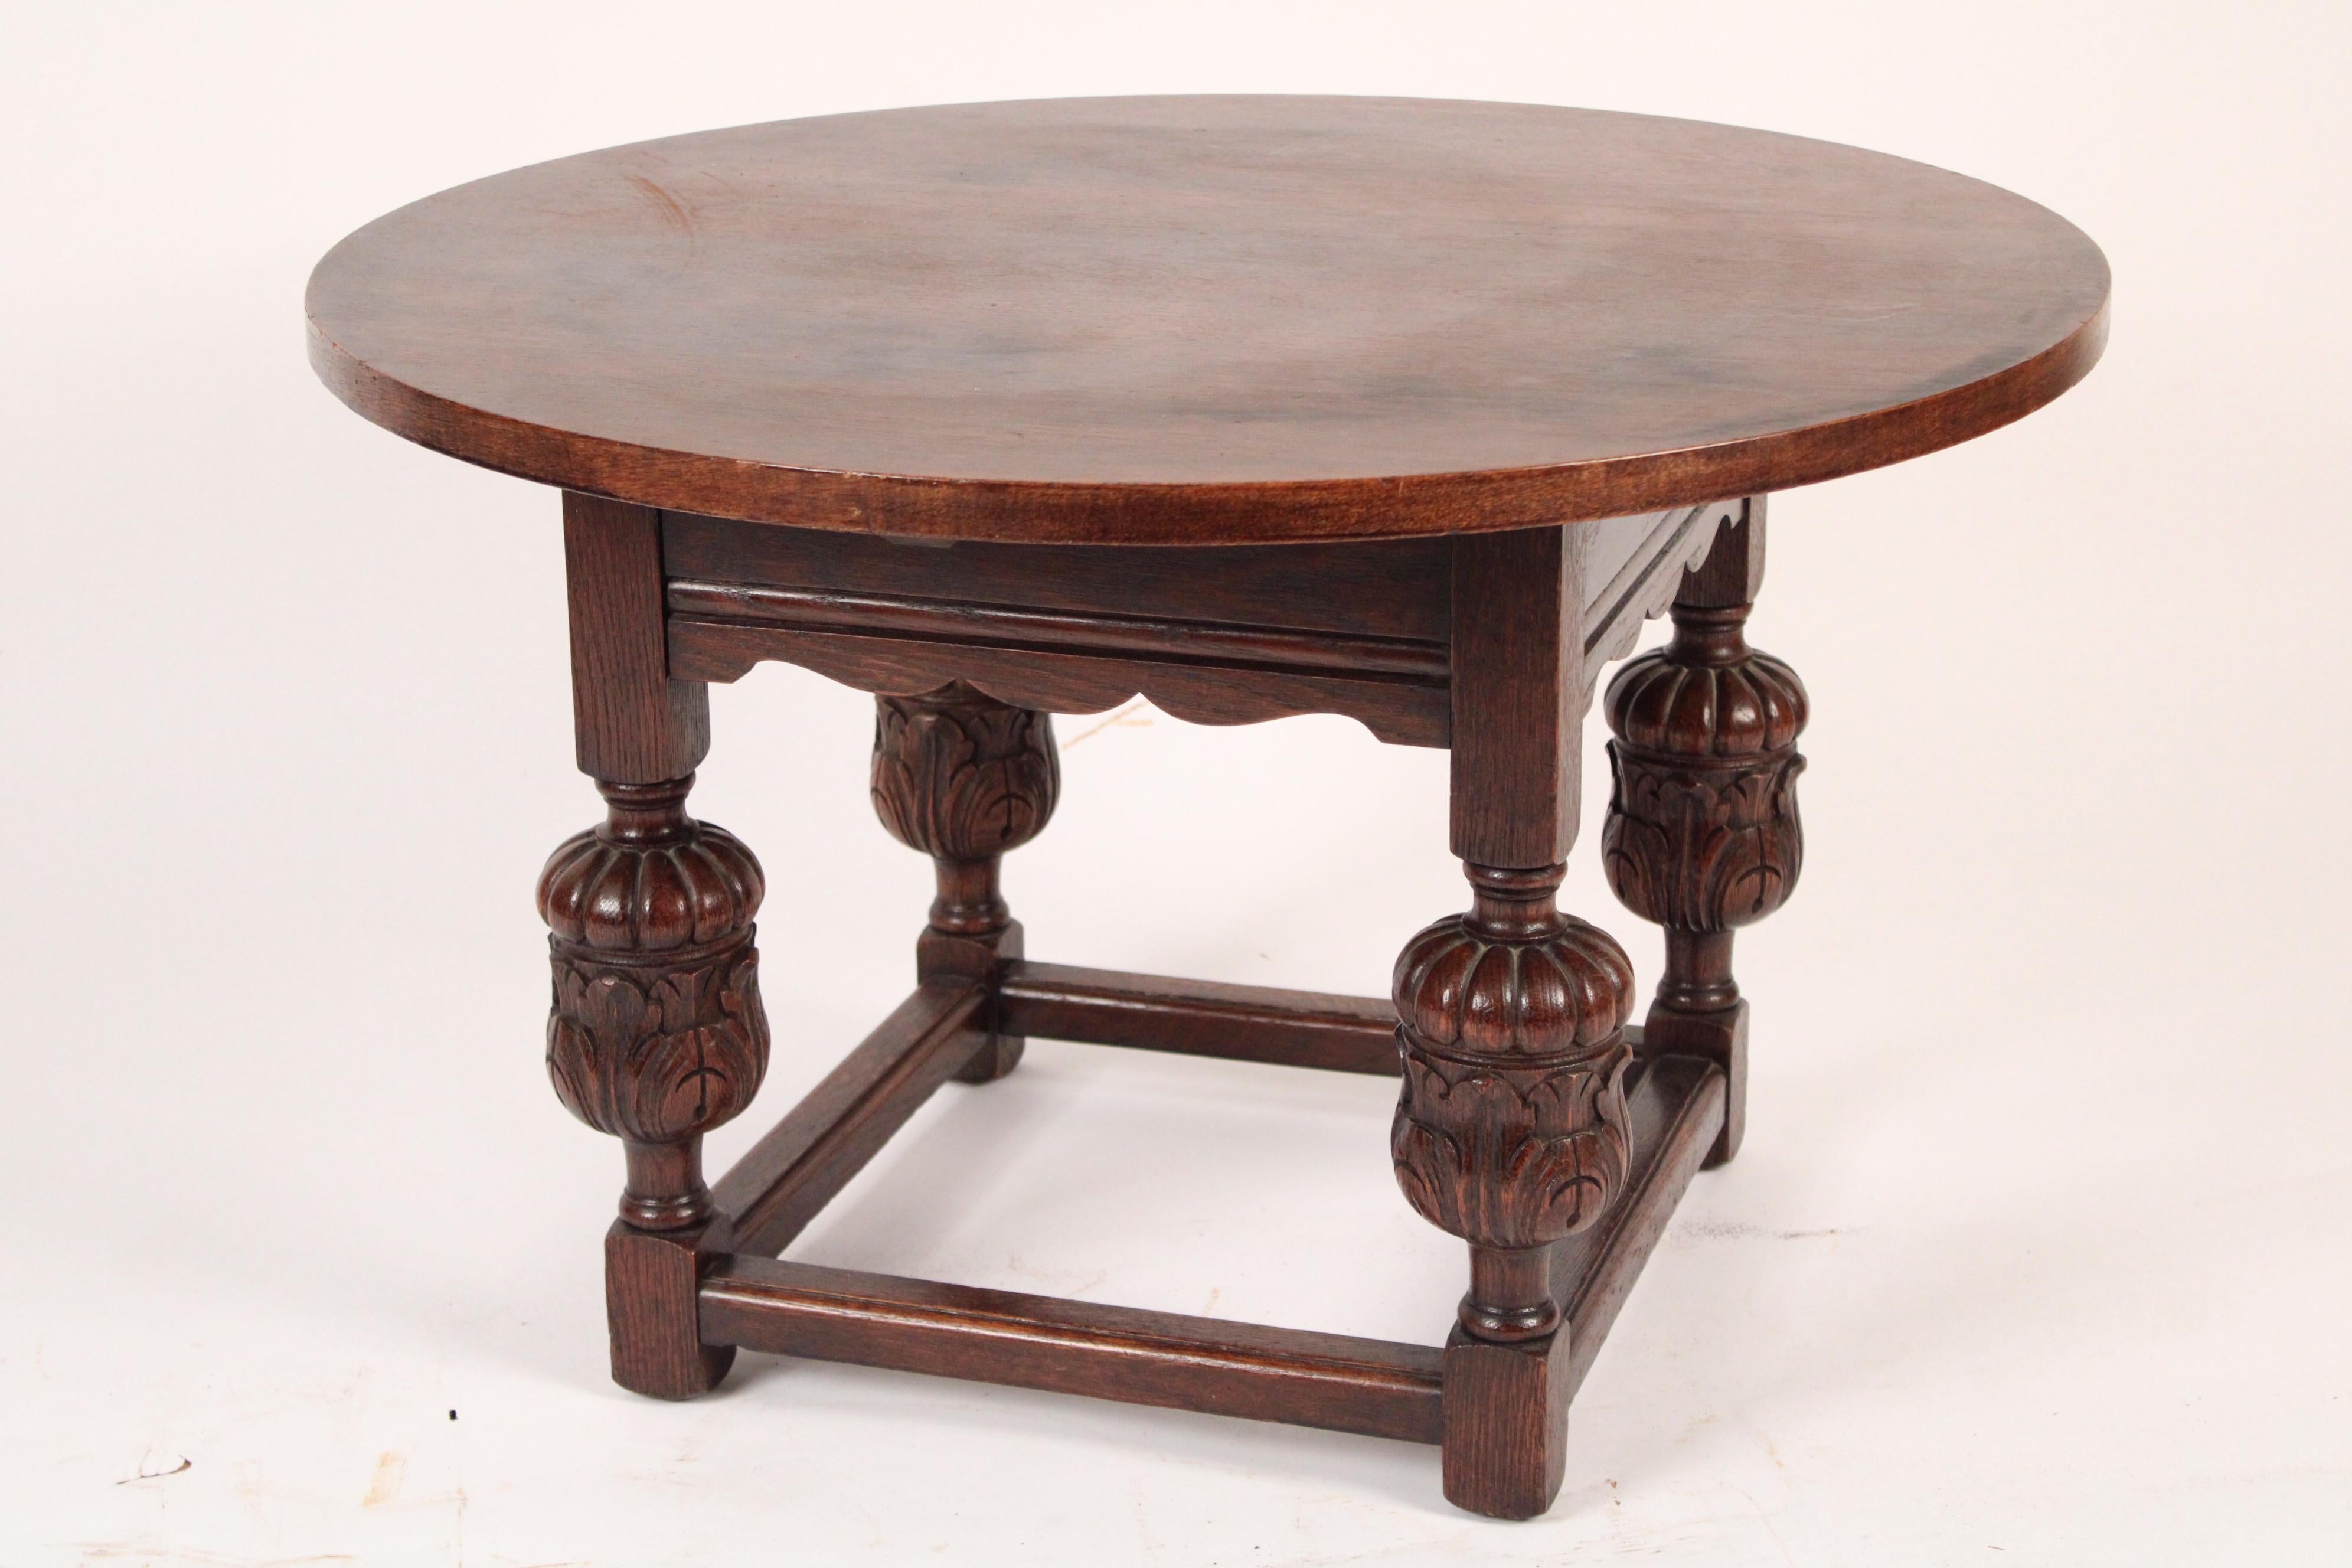 Baroque Revival Spanish Revival Coffee Table